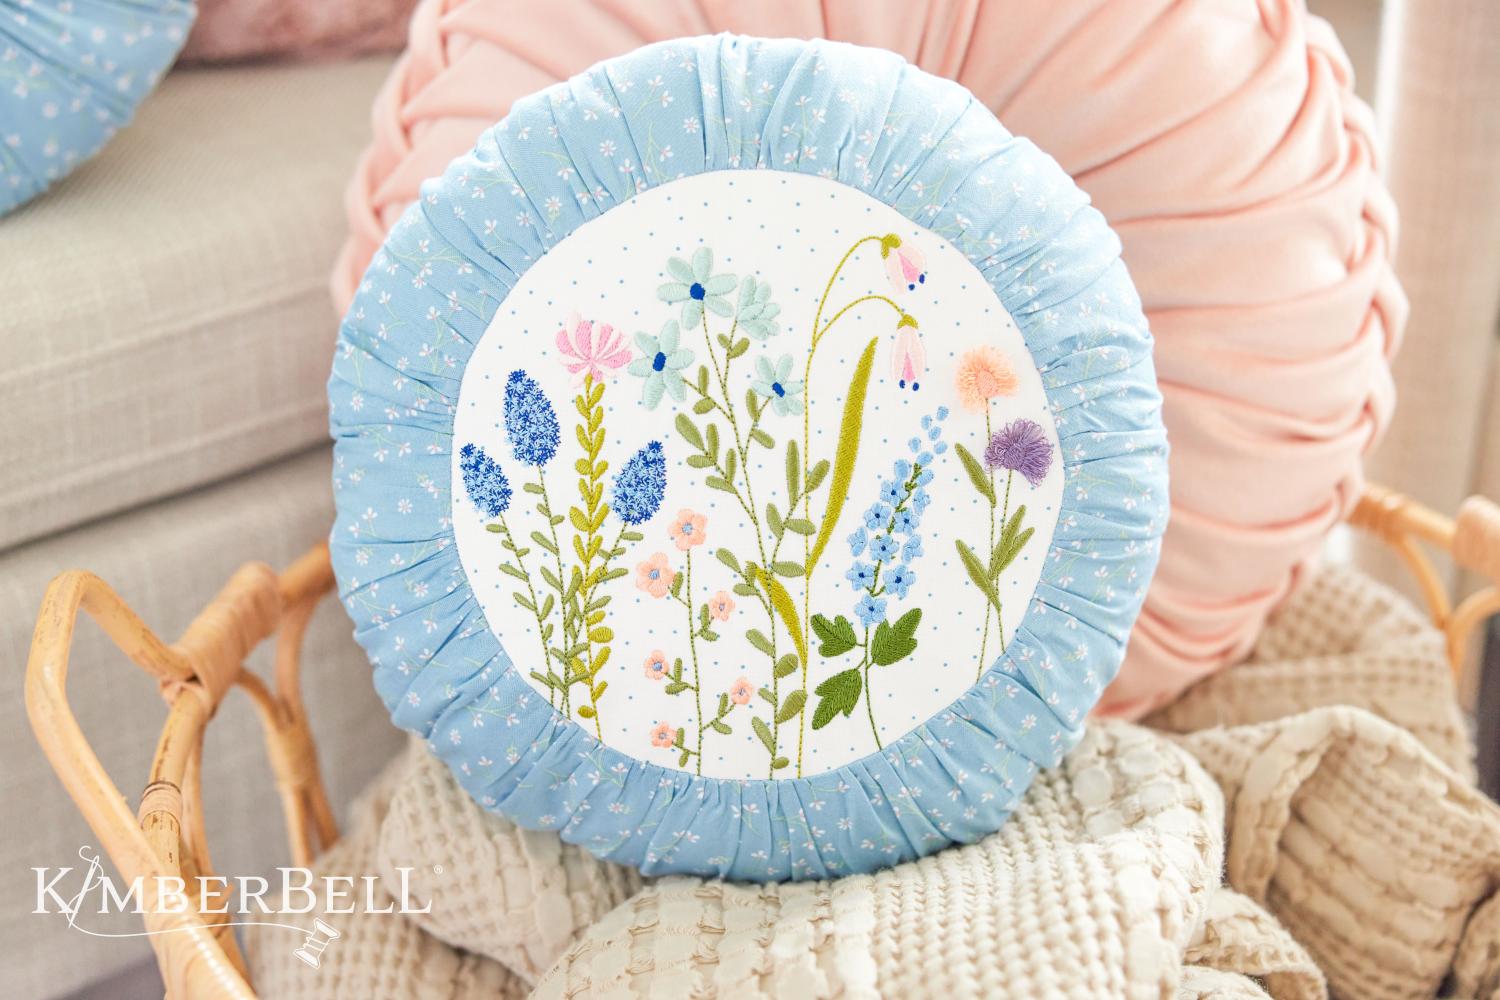 Kimberbell Hello Spring Round Pillow *January 24 Digital Dealer Exclusive